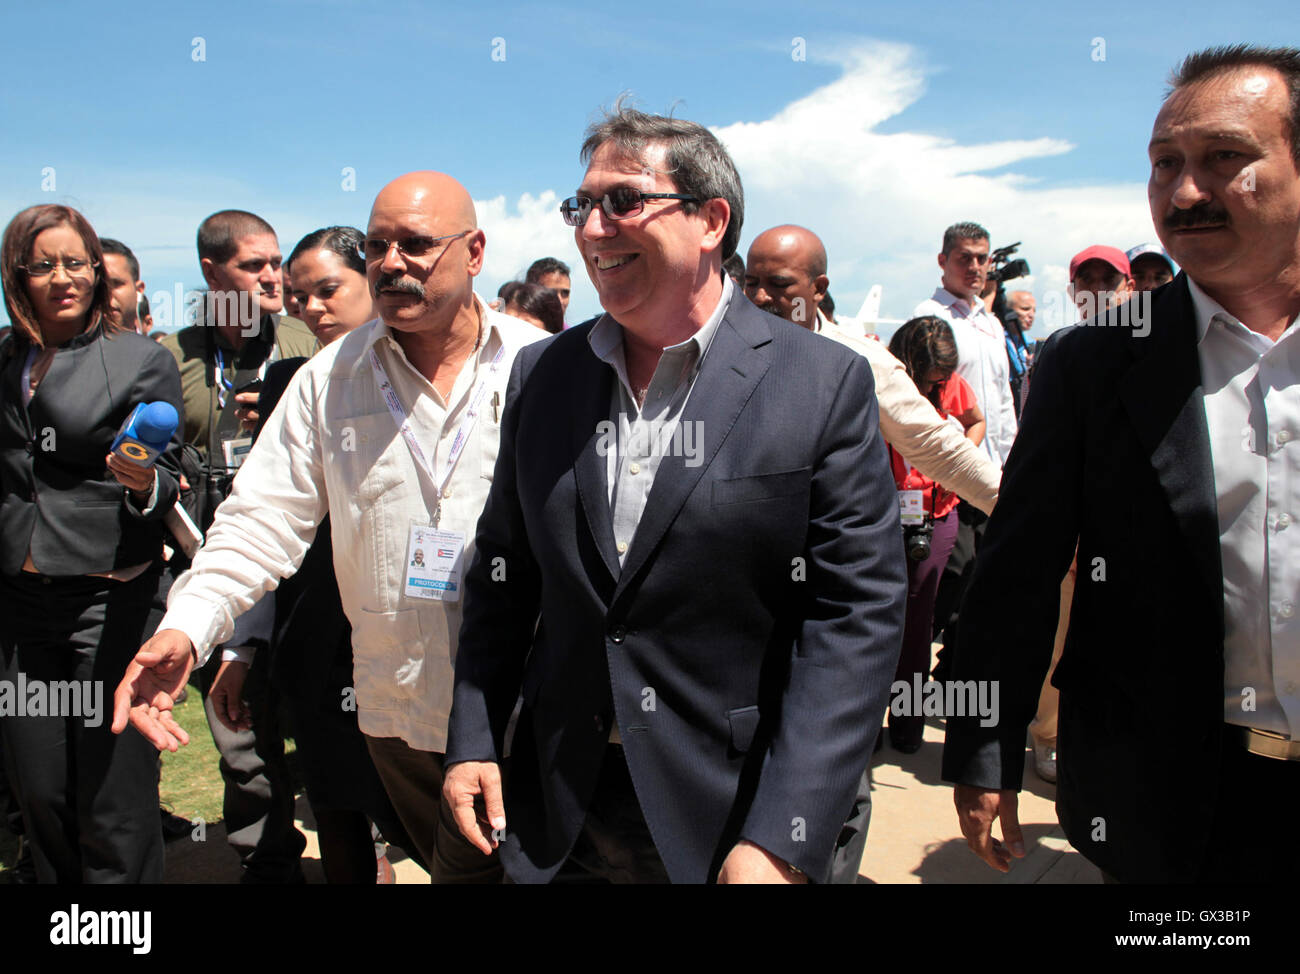 Margarita. 14th Sep, 2016. Cuba's Foreign Minister Bruno Rodriguez (2nd R) arrives at Santiago Marino Caribbean International Airport to attend the 17th Non-Aligned Movement (NAM) summit in Venezuela Sept. 14, 2016. The 17th NAM summit kicked off in the Caribbean island of Margarita on Tuesday. © Boris Vergara/Xinhua/Alamy Live News Stock Photo